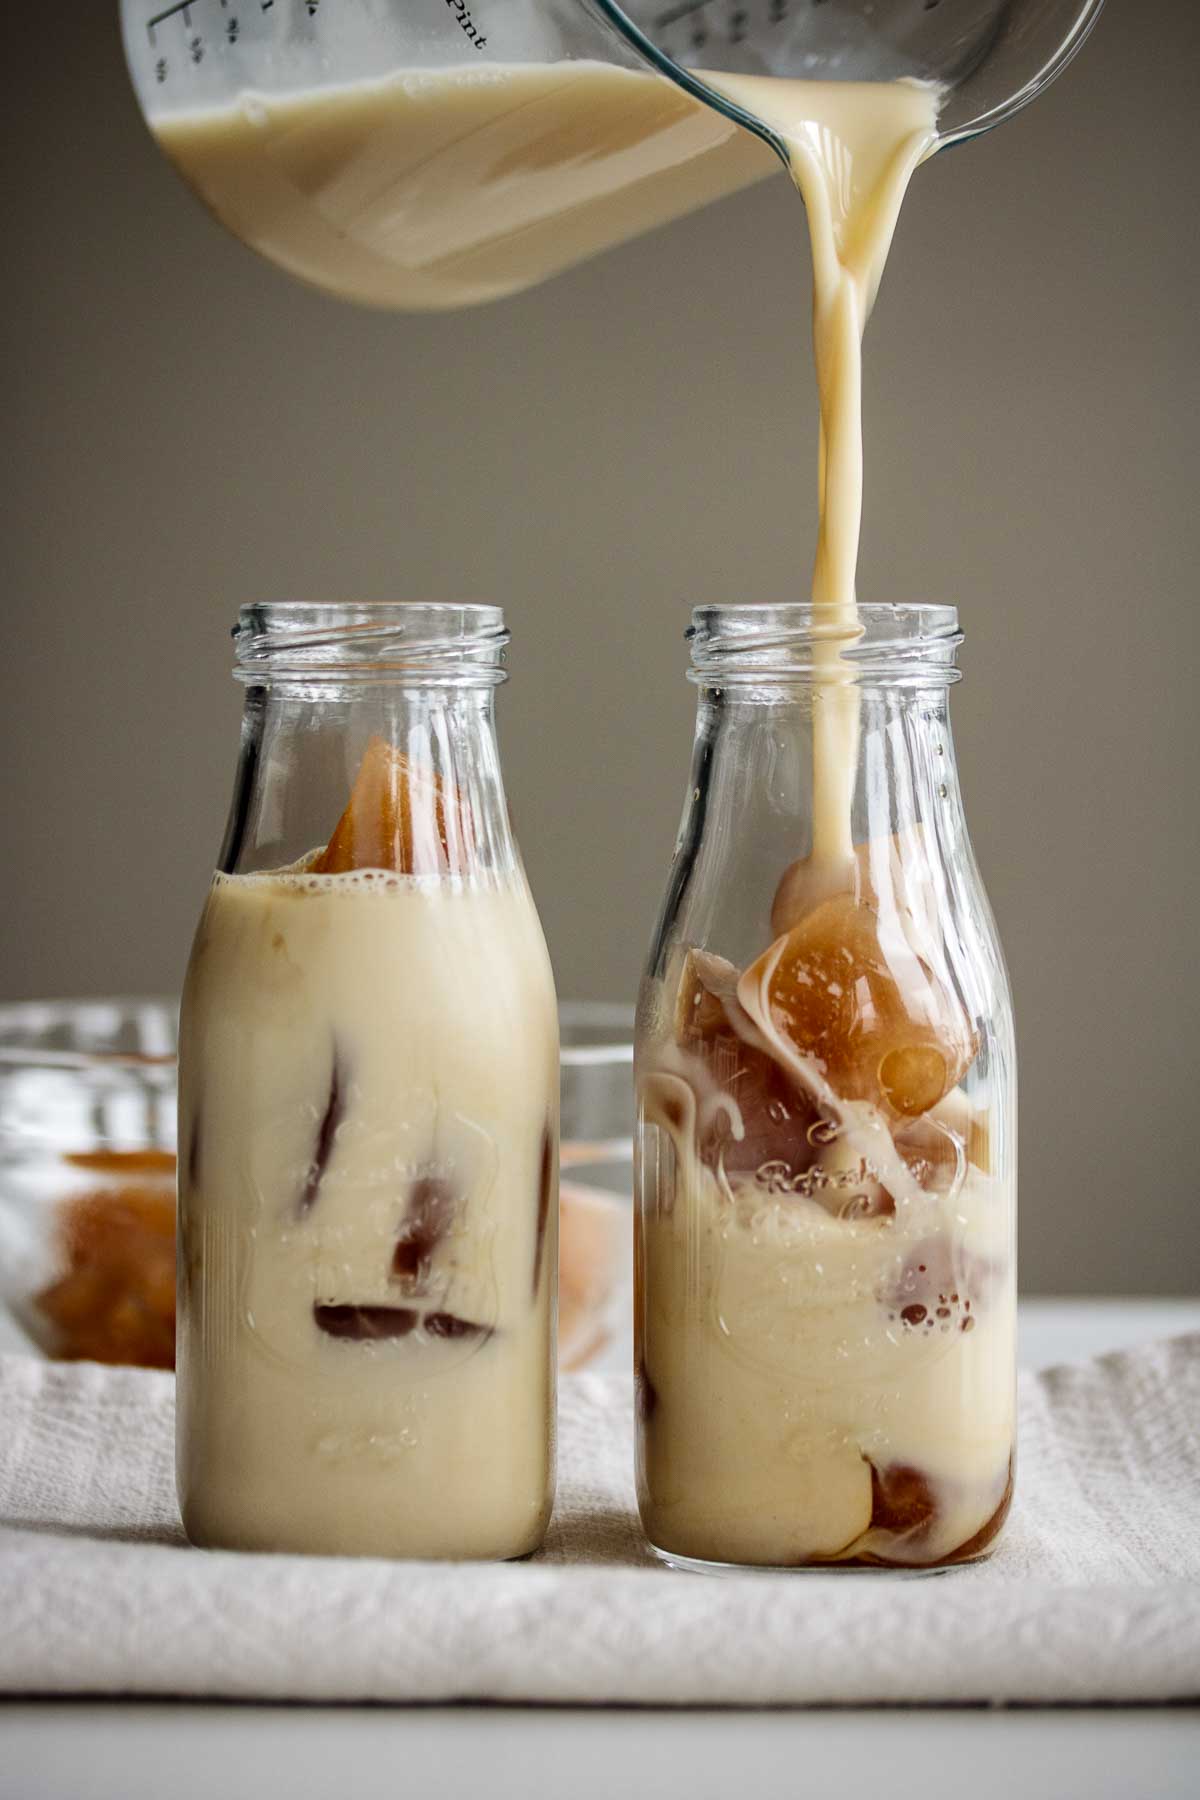 Make cold milk tea poured over ice cubes.